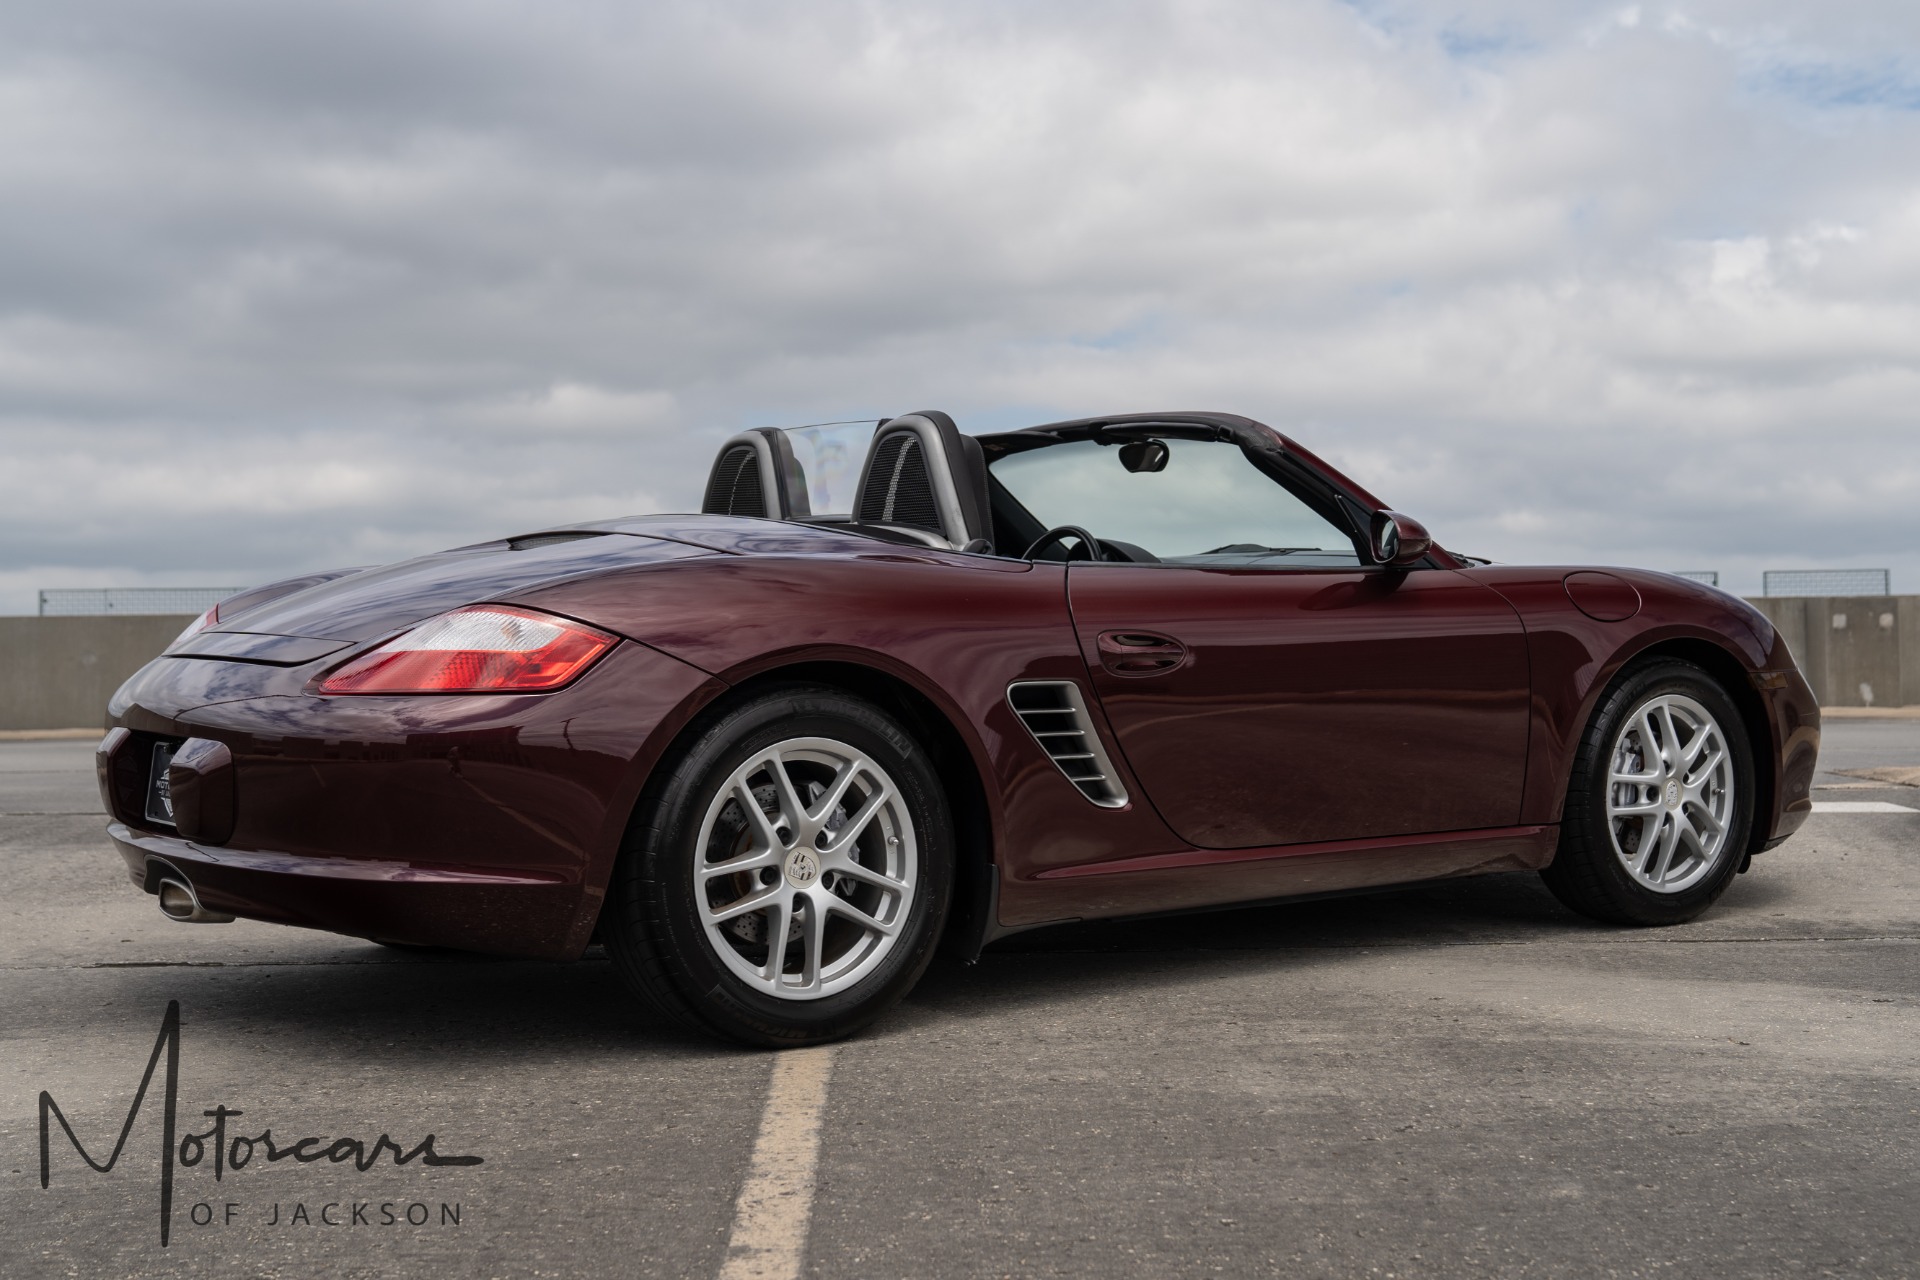 Used-2005-Porsche-Boxster-for-sale-Jackson-MS